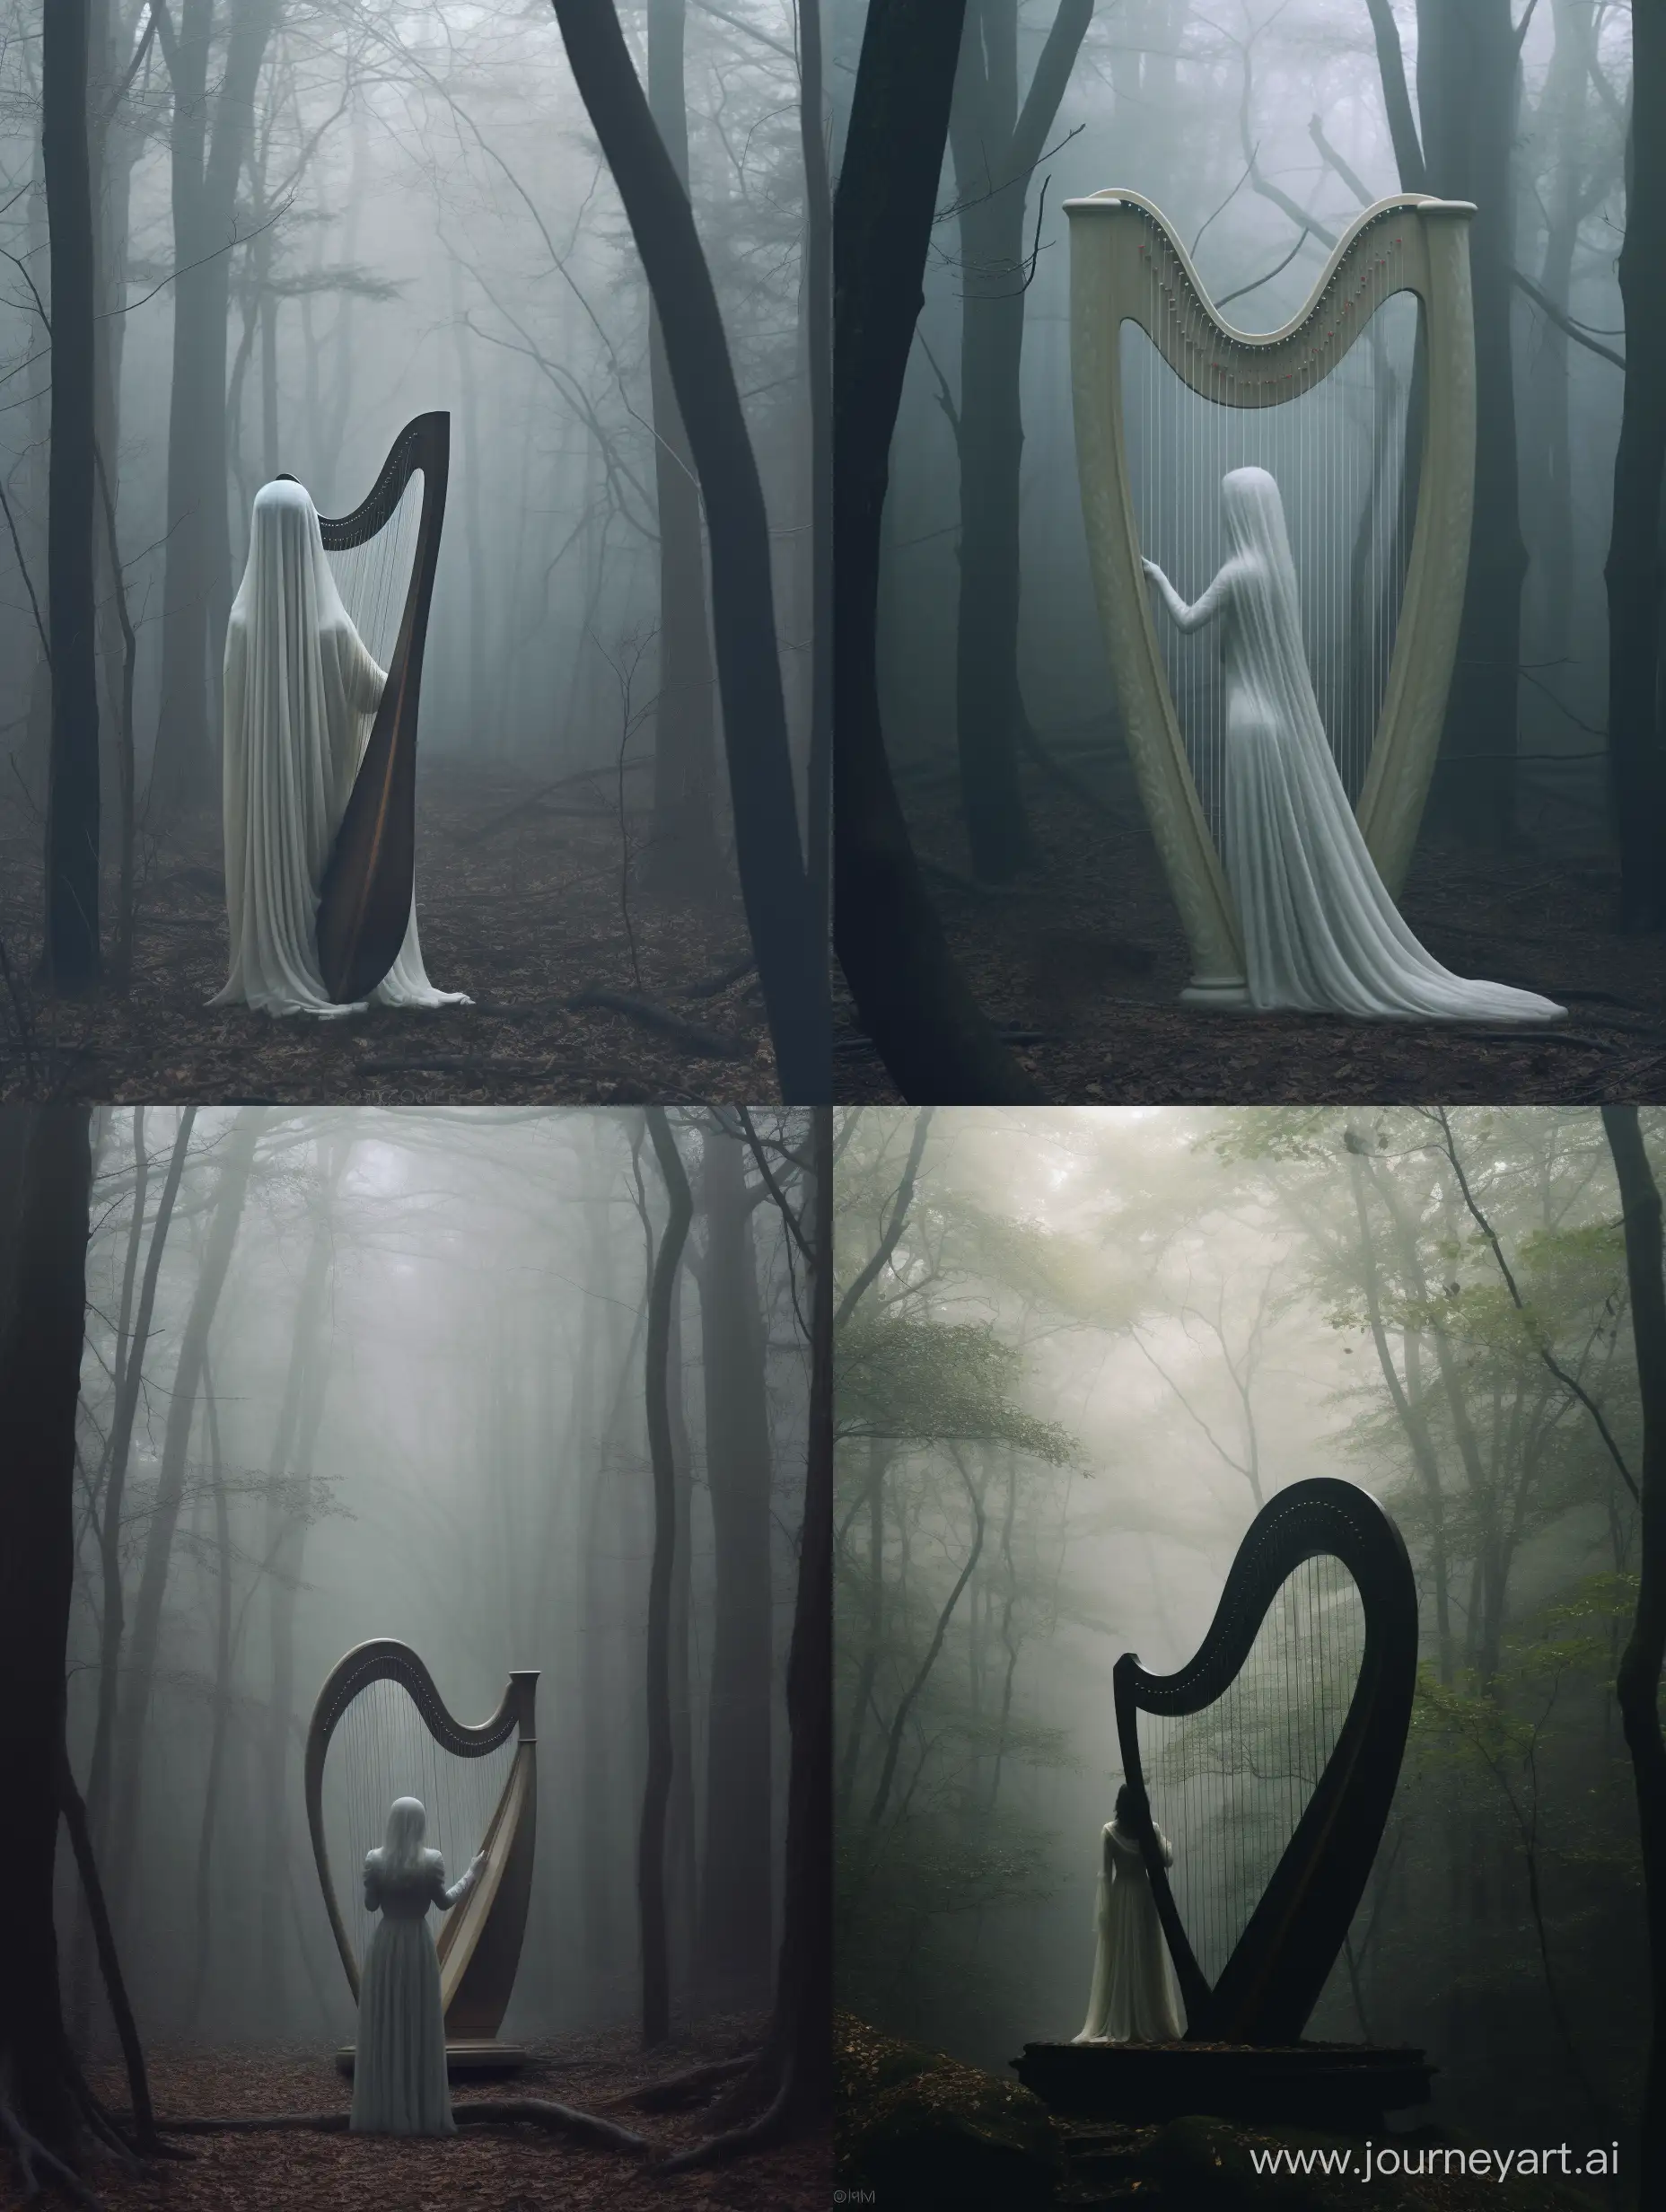 An ethereal figure playing a large harp in a creepy minimalistic forest. Hyper real, hassleblad